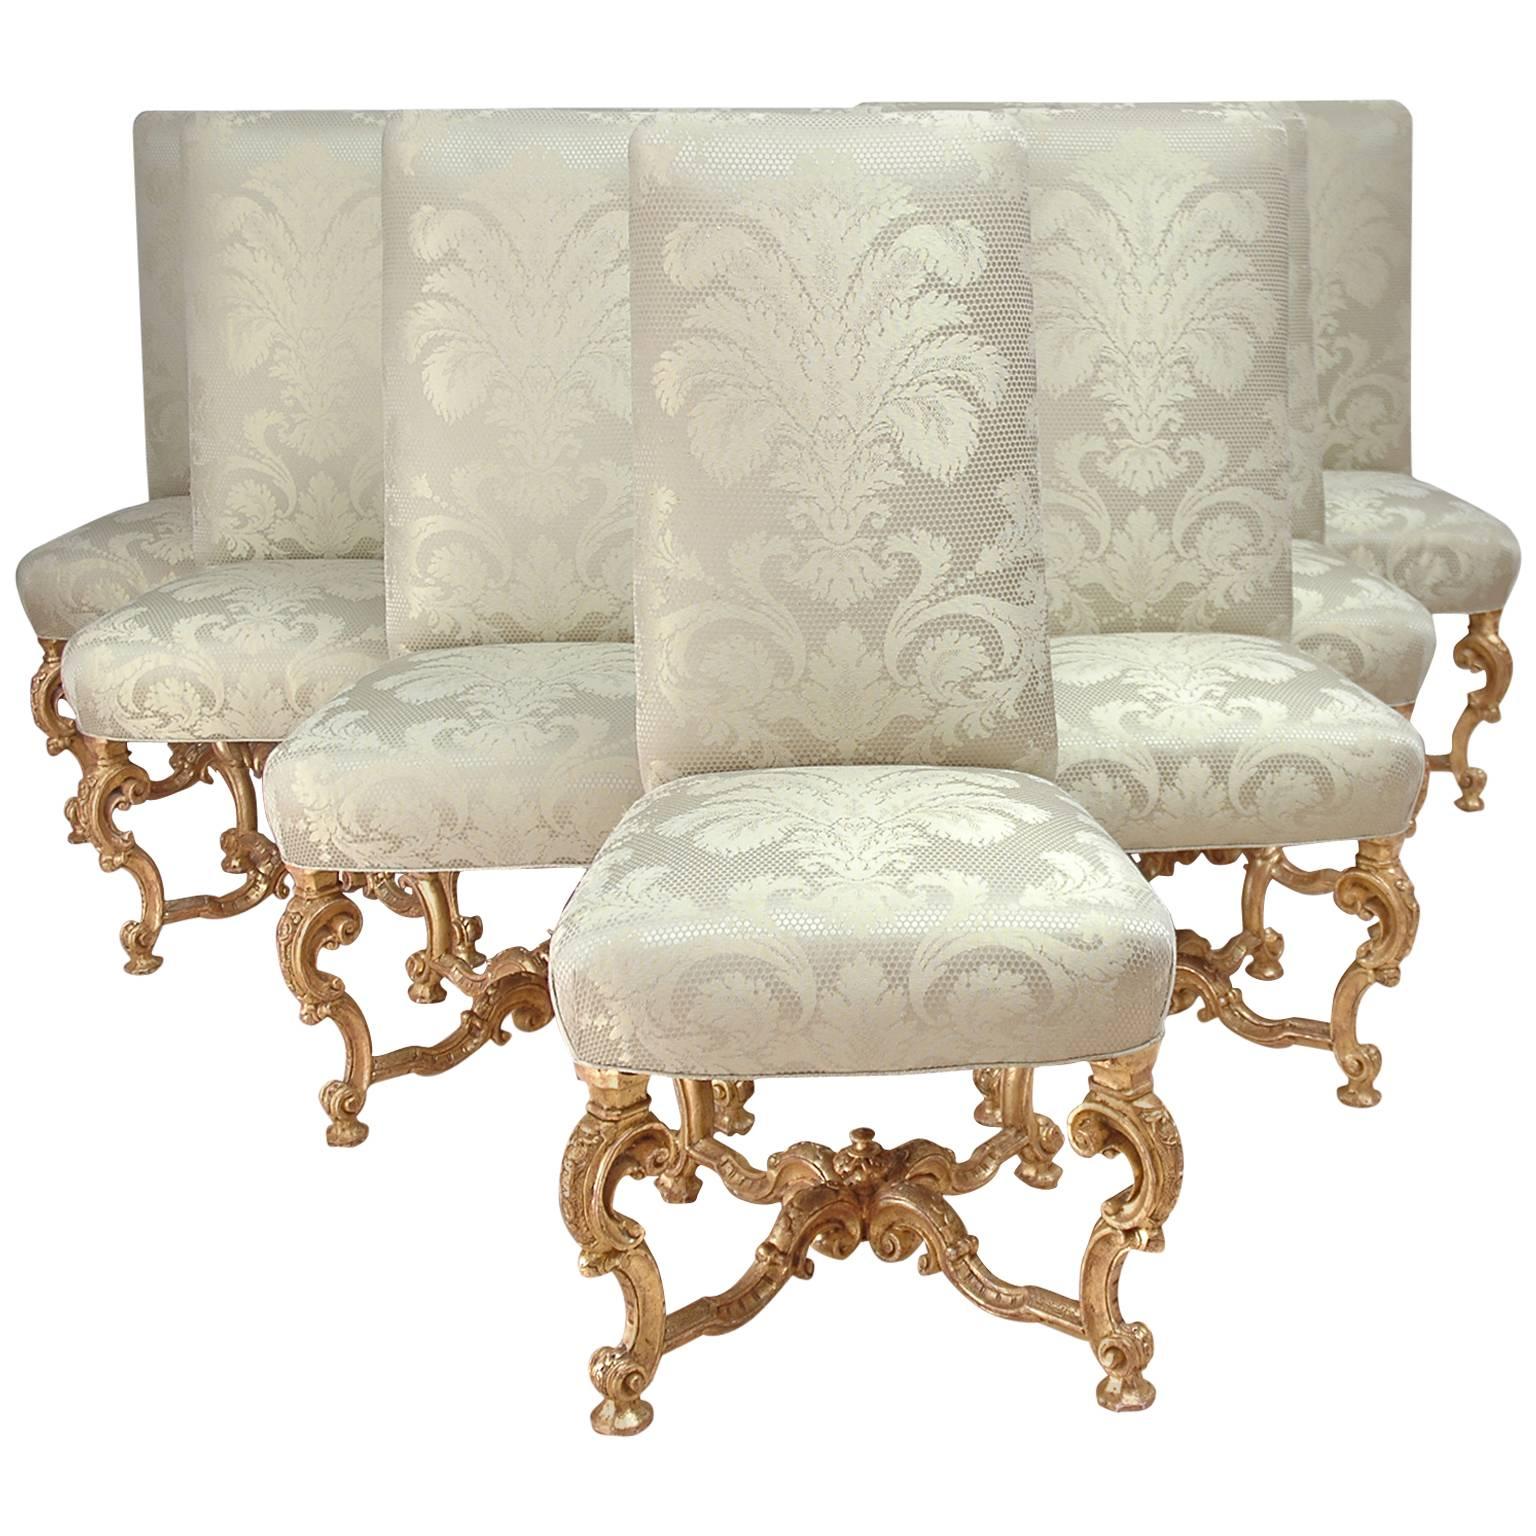 Set of Ten (10) Venetian Dining Chairs in Carved and Gilded Wood with Upholstery